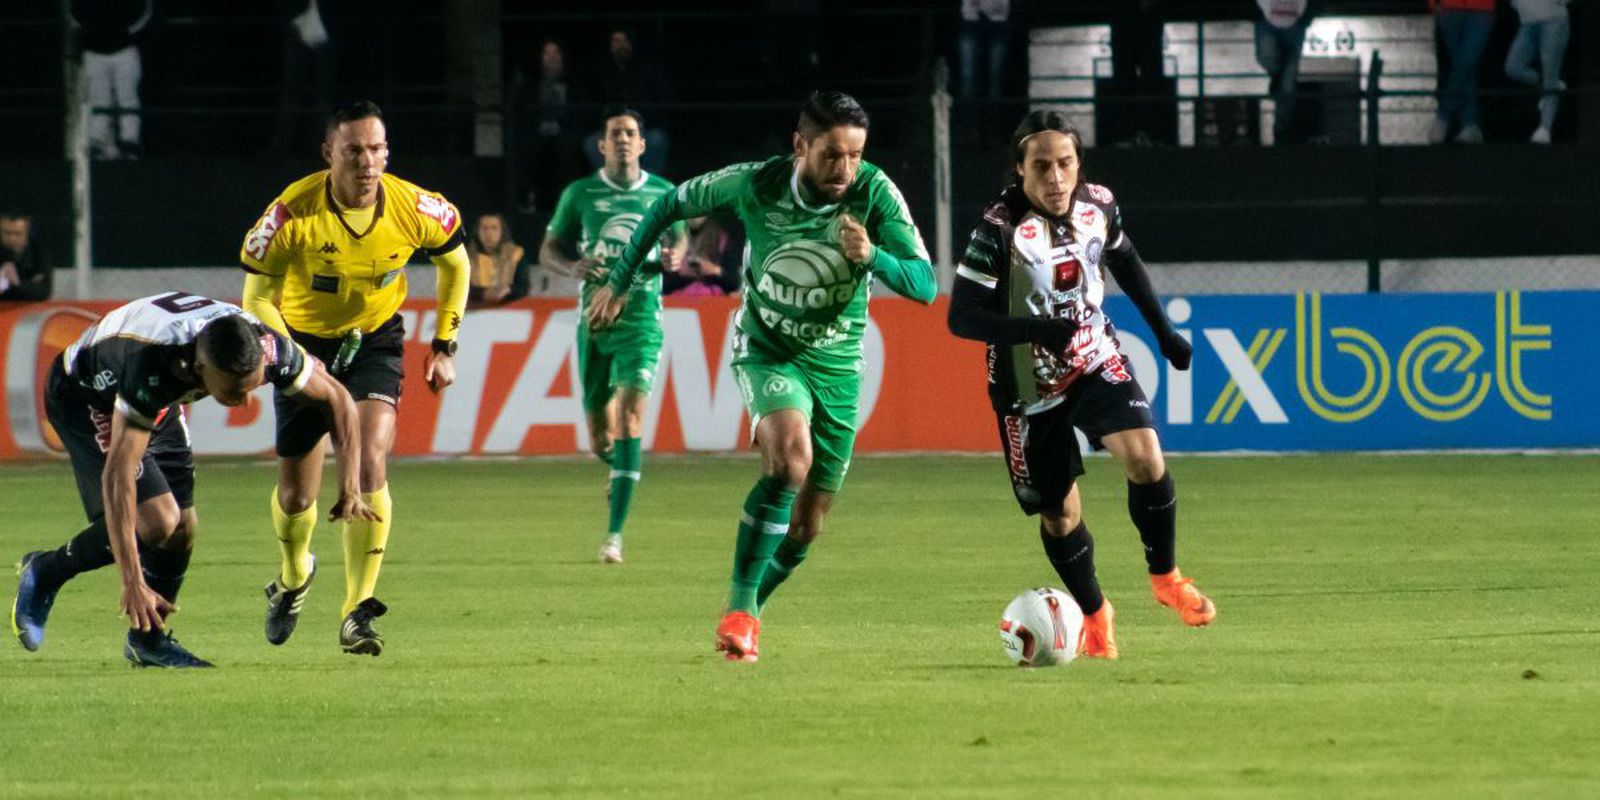 Serie B: Operário beats Chapecoense 2-1 in the opening of the 15th round